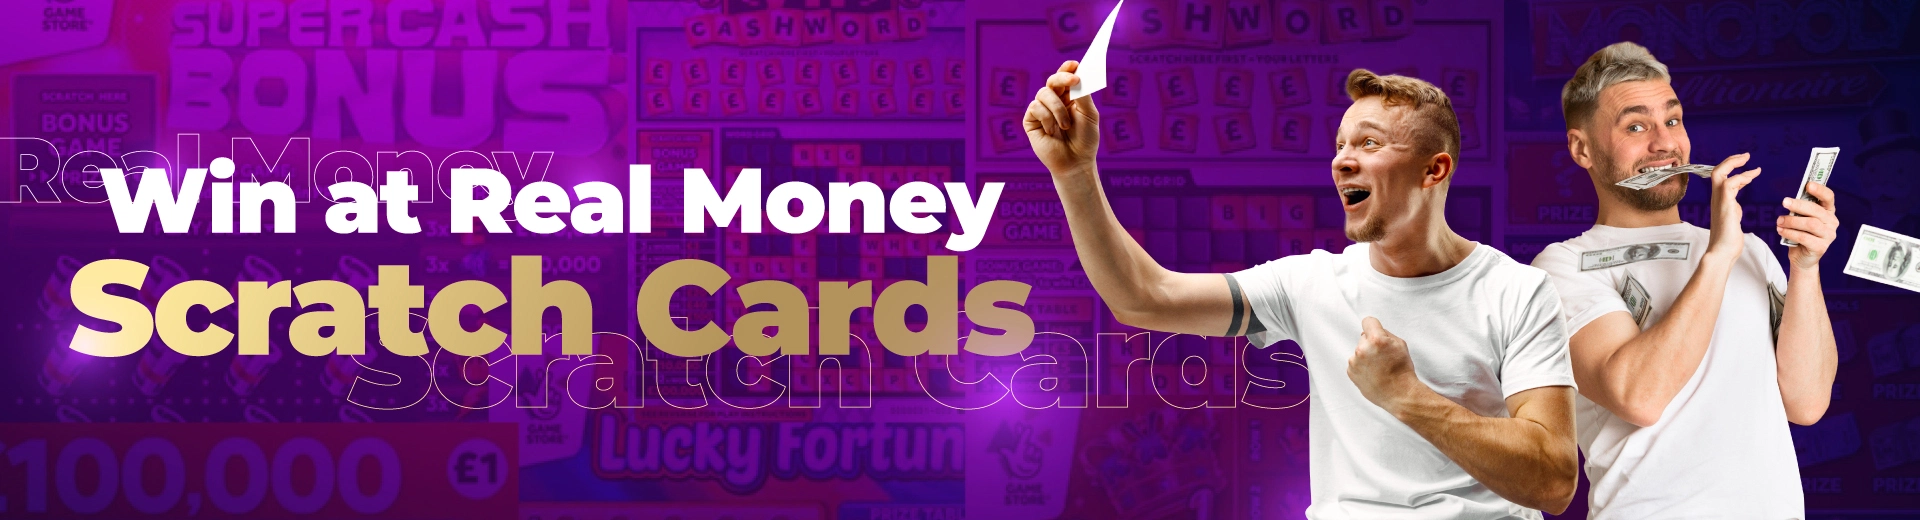 How to Win at Real Money Scratch Cards